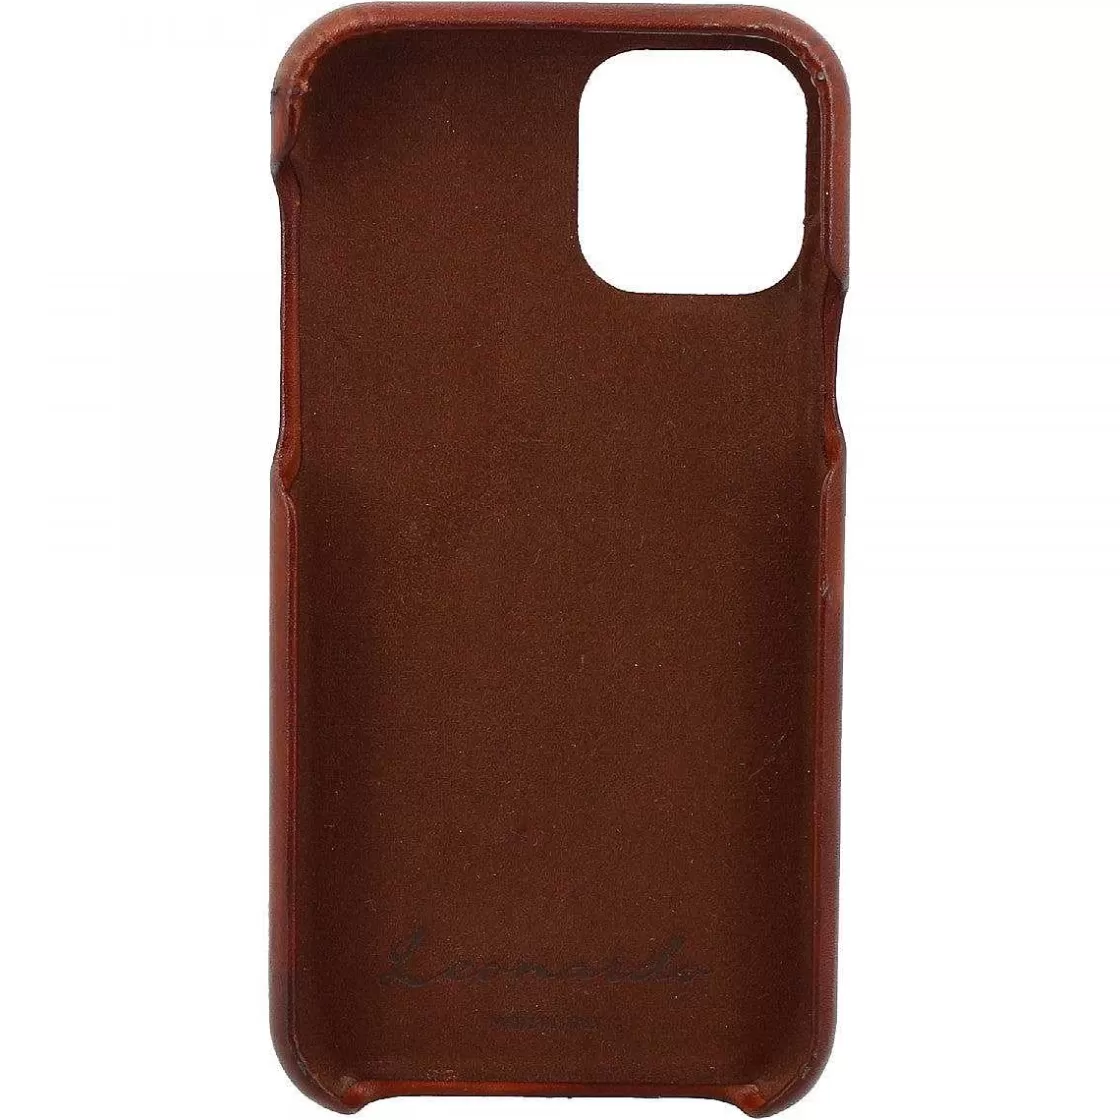 Leonardo Iphone Cover In Hand-Buffered Brandy Color Leather Store